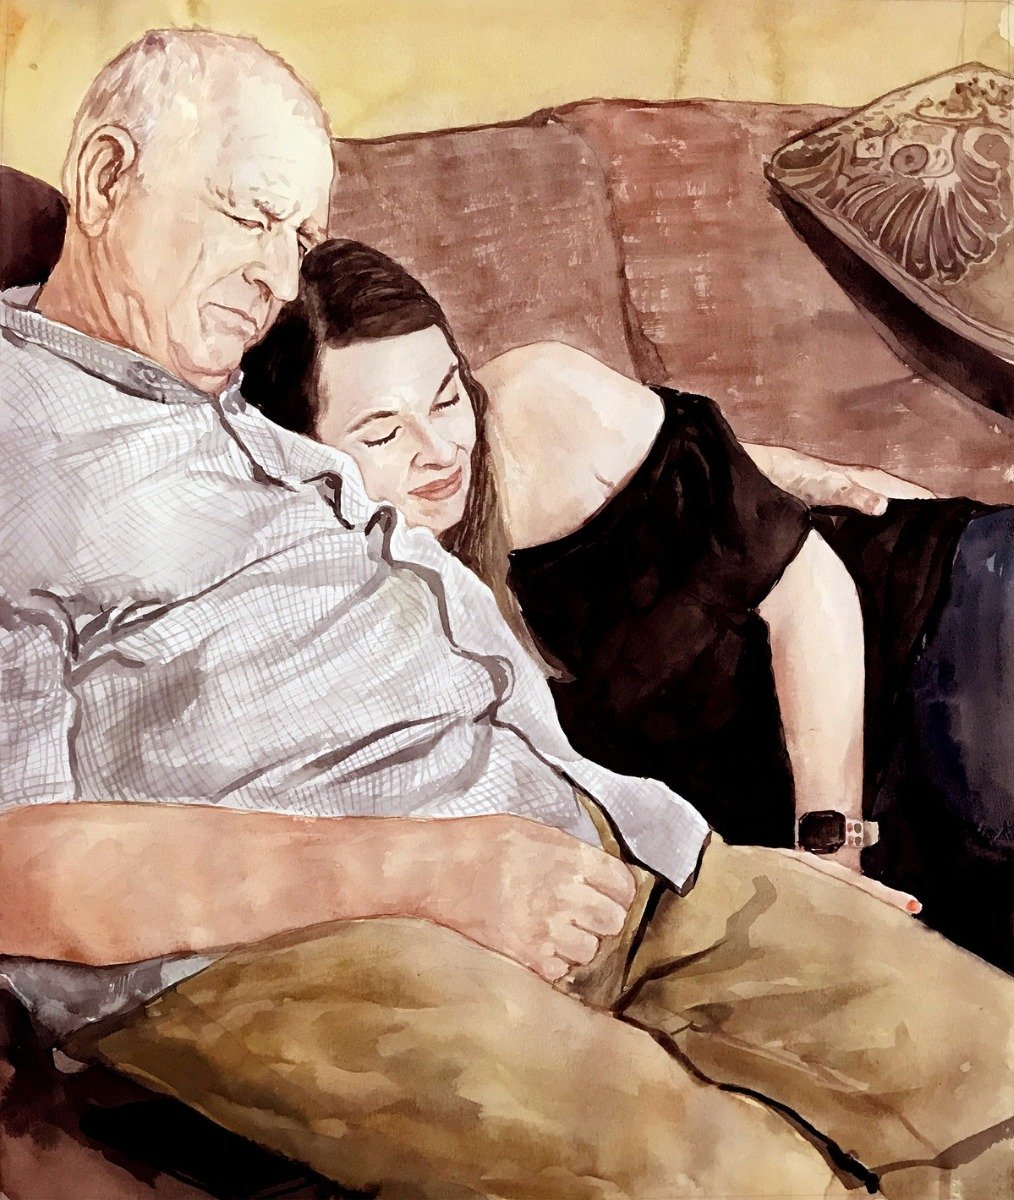 A watercolor retirement drawing of an old man and young girl in a thick style.